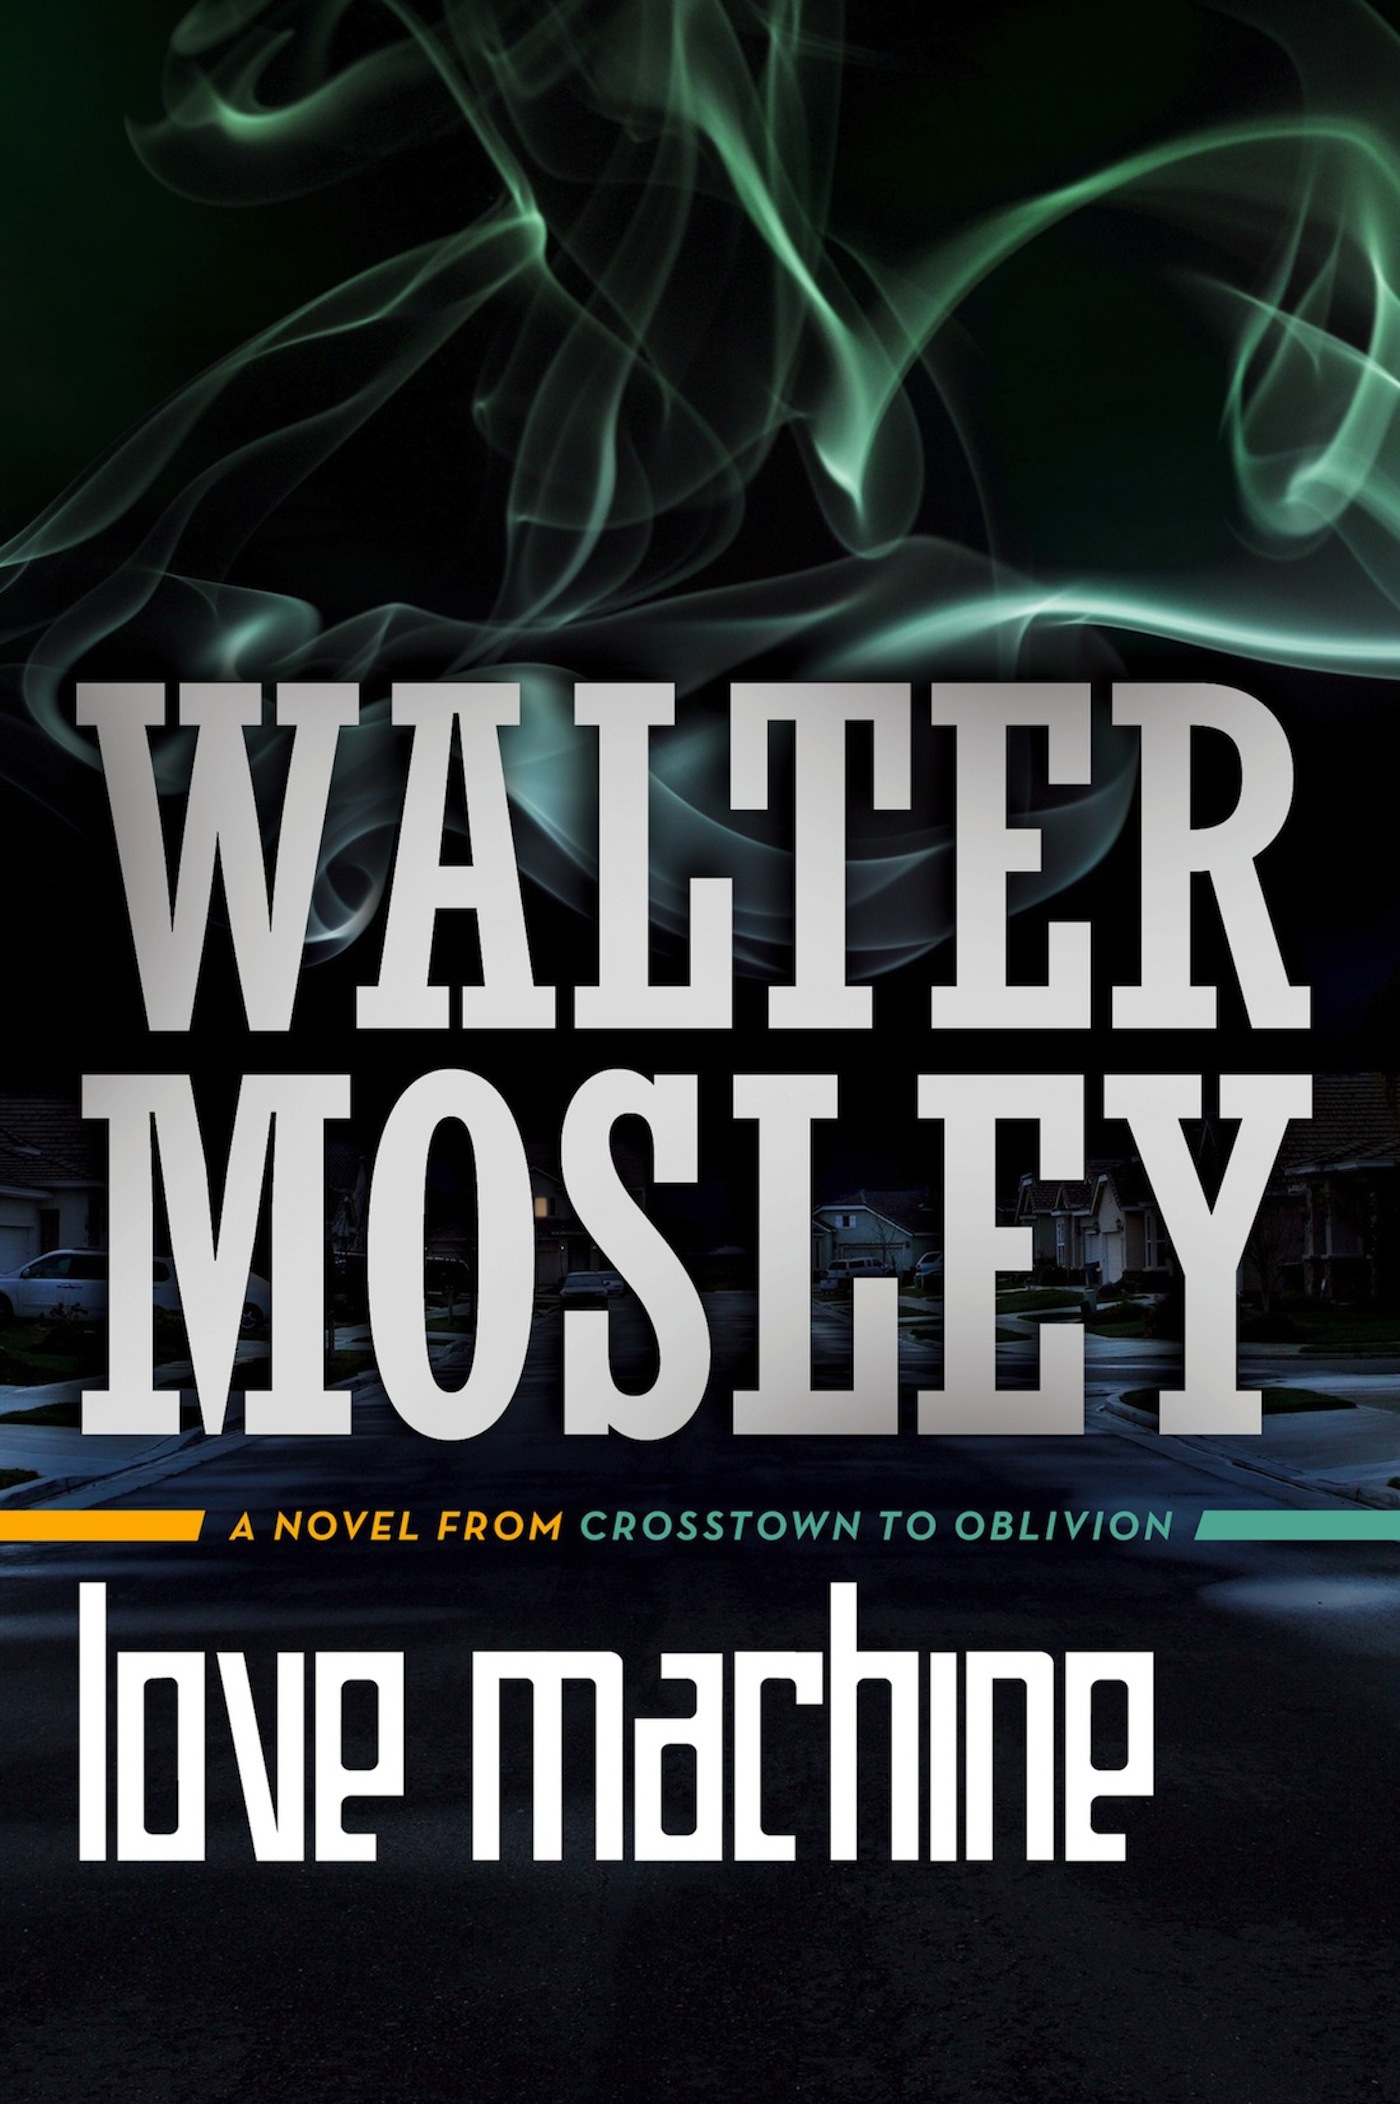 Love Machine : A Novel from Crosstown to Oblivion by Walter Mosley